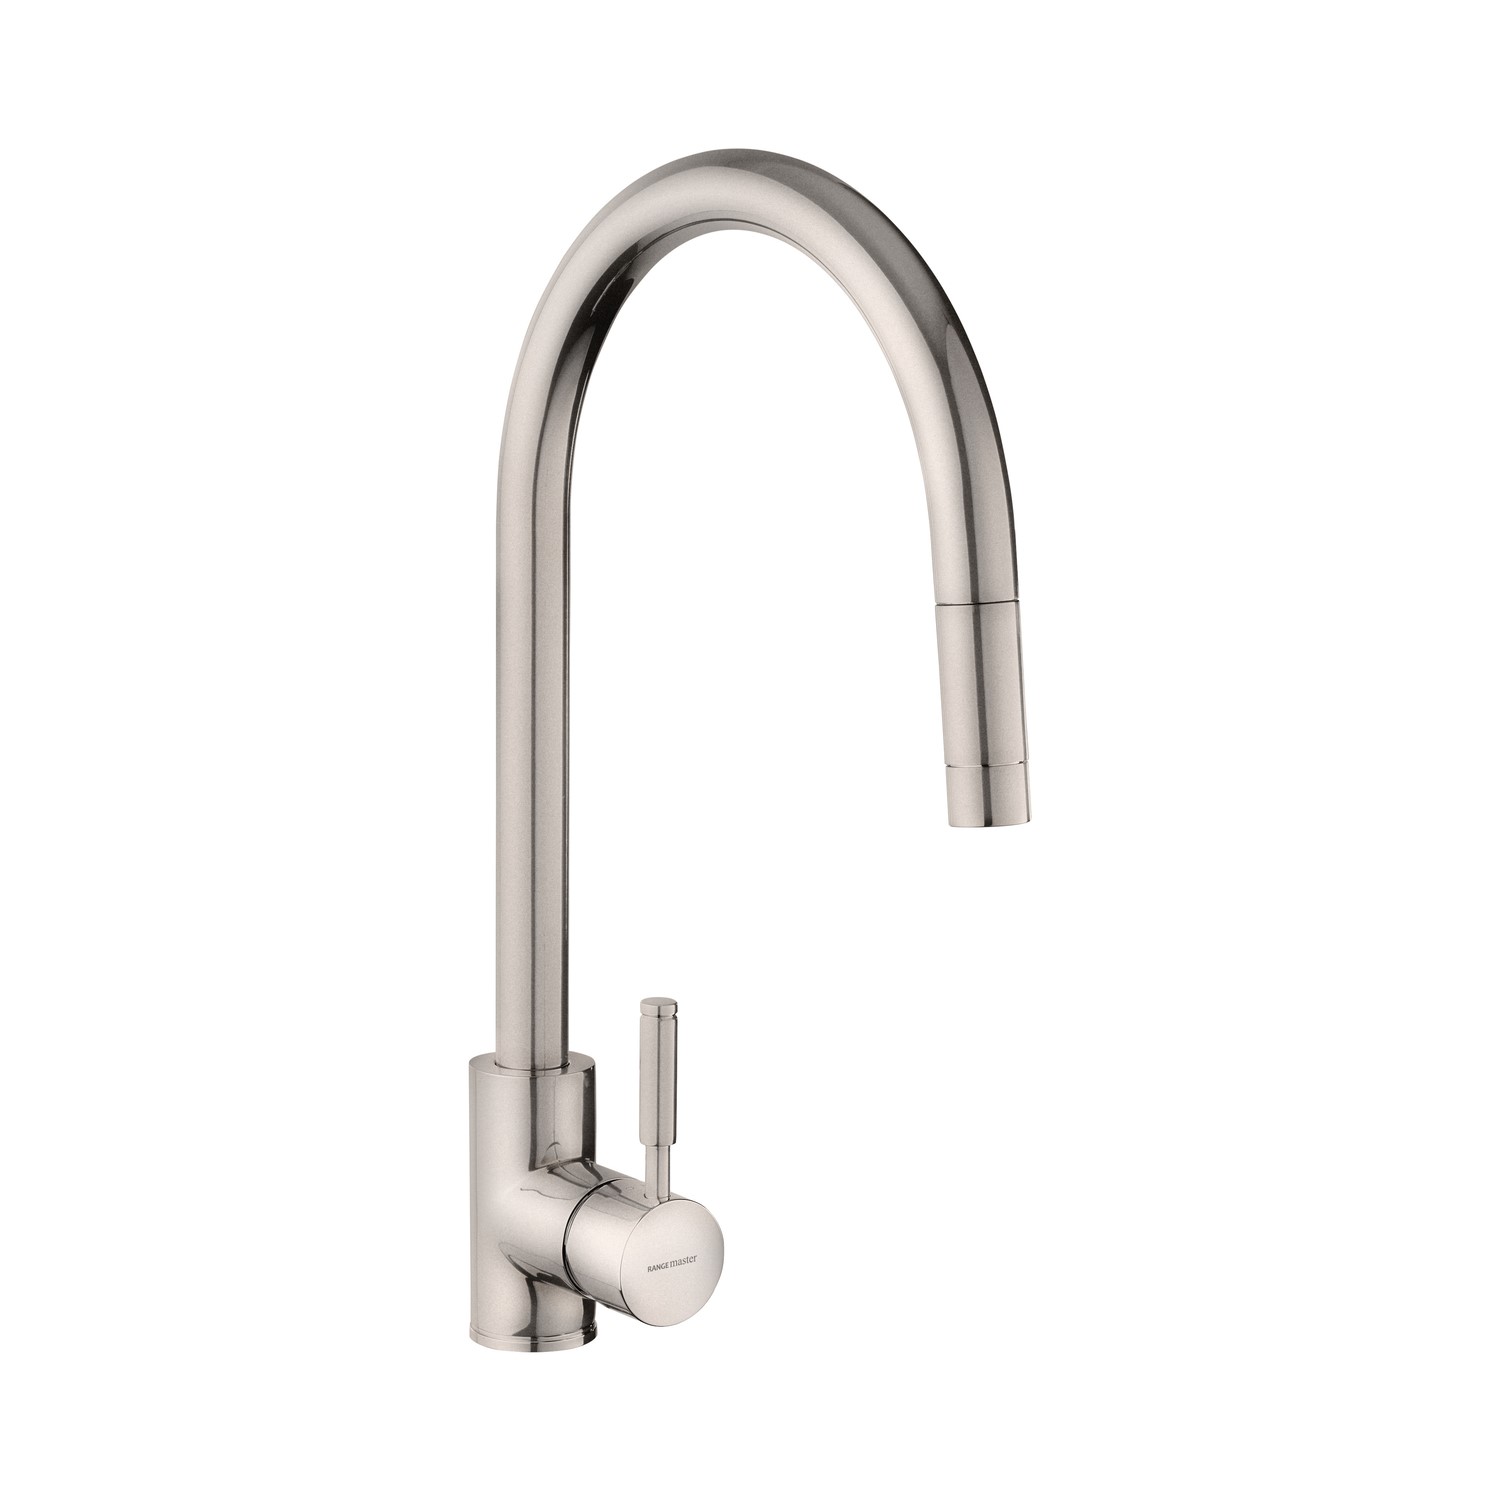 PERRIN ＆ ROWE HOXTON SINGLE HOLE LAVATORY FAUCET IN POLISHED NICKEL WITH  SINGLE METAL LEVER AND POP-UP 並行輸入品 浴室、浴槽、洗面所